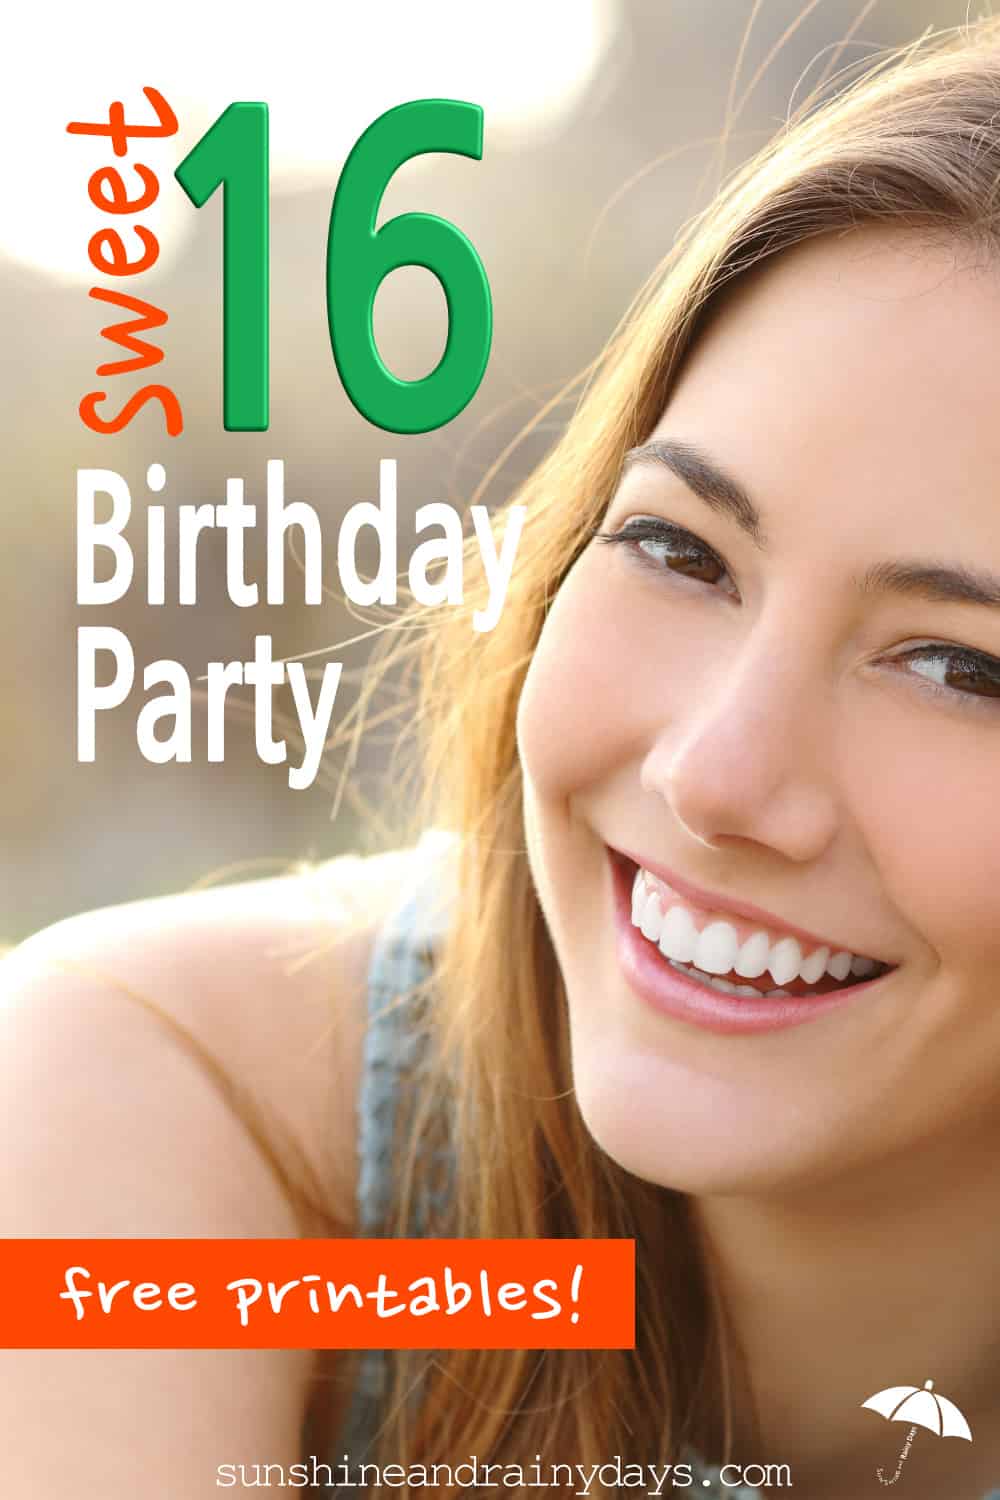 By now you've had just about every kind of Birthday Party imaginable and your Sweet 16 son or daughter may not want a big to do this time around. Really, they just want time to hang out with their friends and have a good time! No agenda, just food and opportunities!